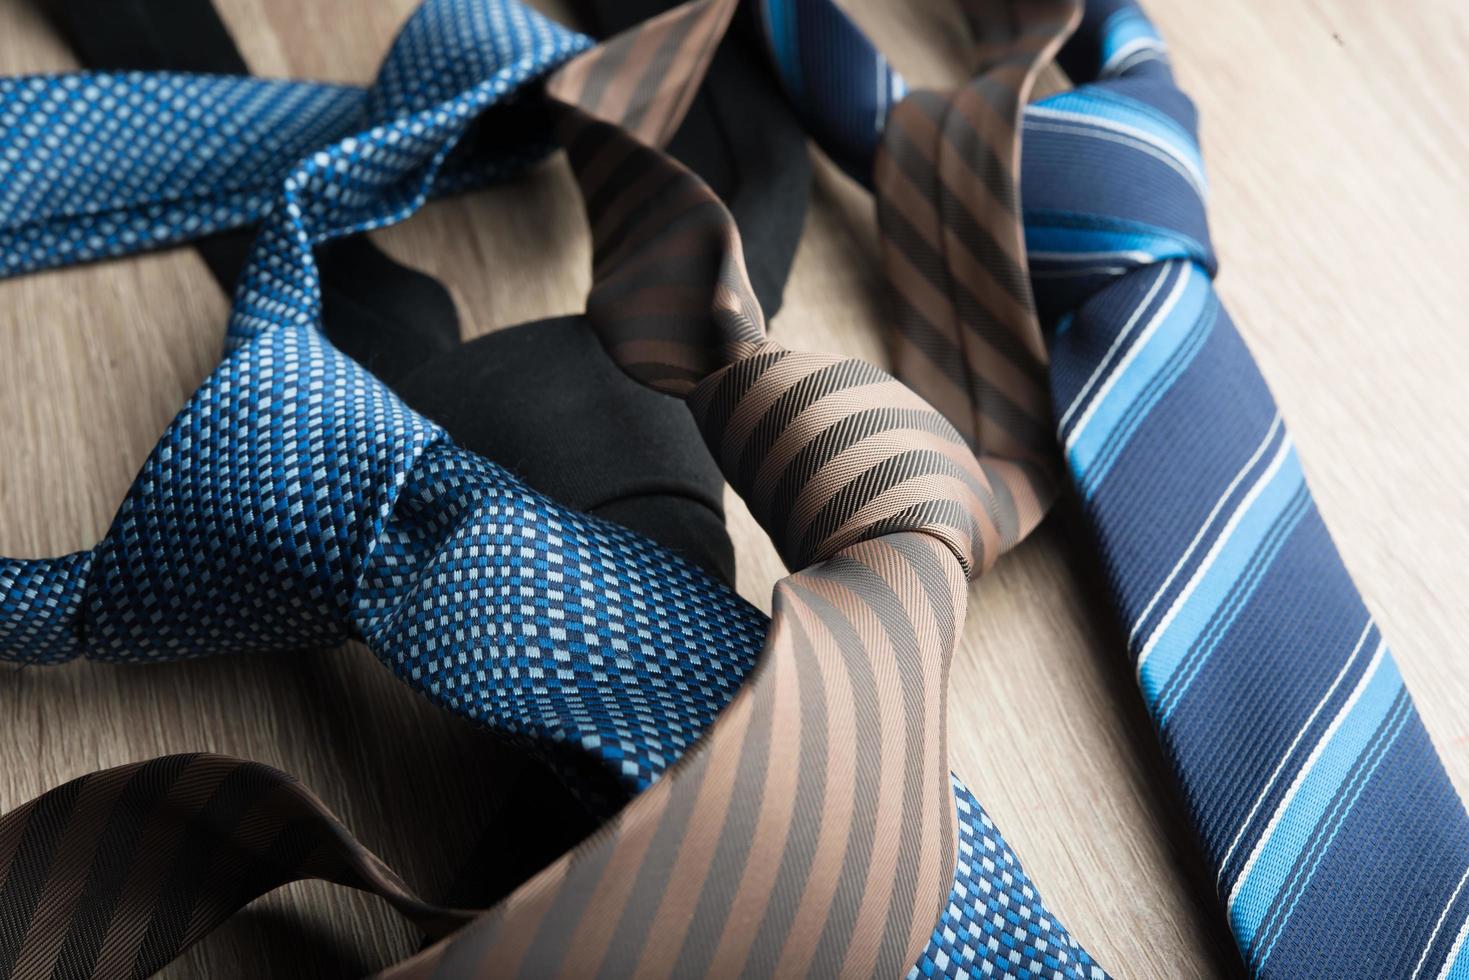 Silk neck ties on a wooden background photo